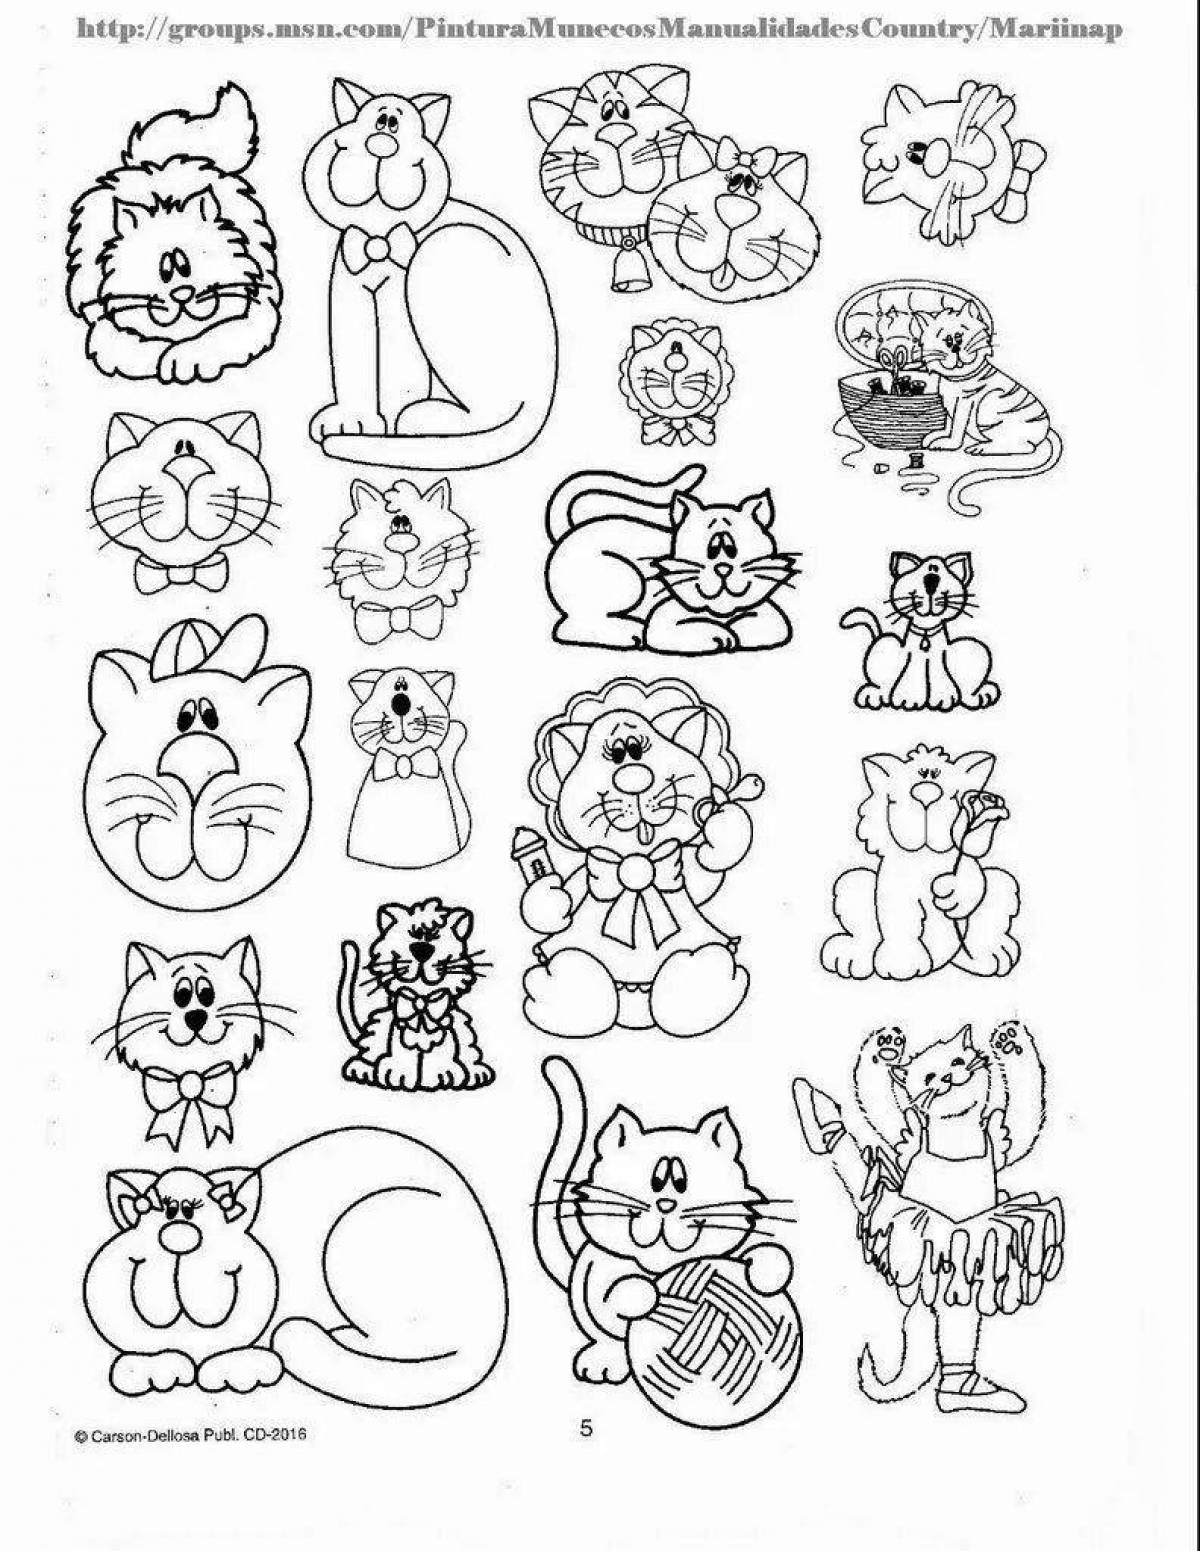 Adorable little cats coloring book